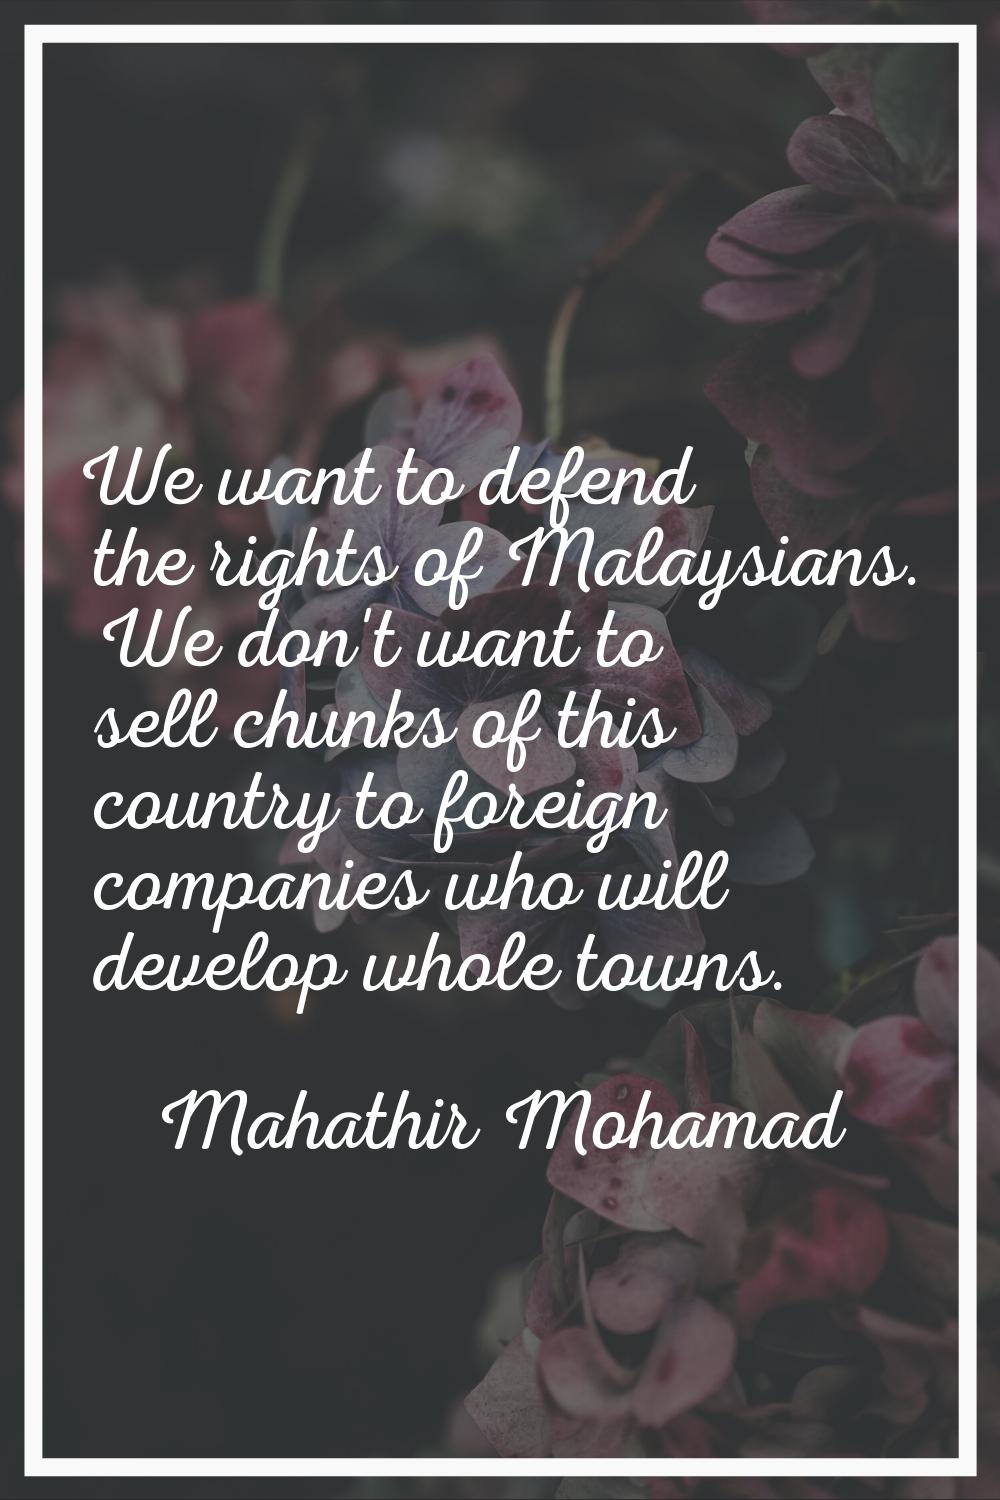 We want to defend the rights of Malaysians. We don't want to sell chunks of this country to foreign